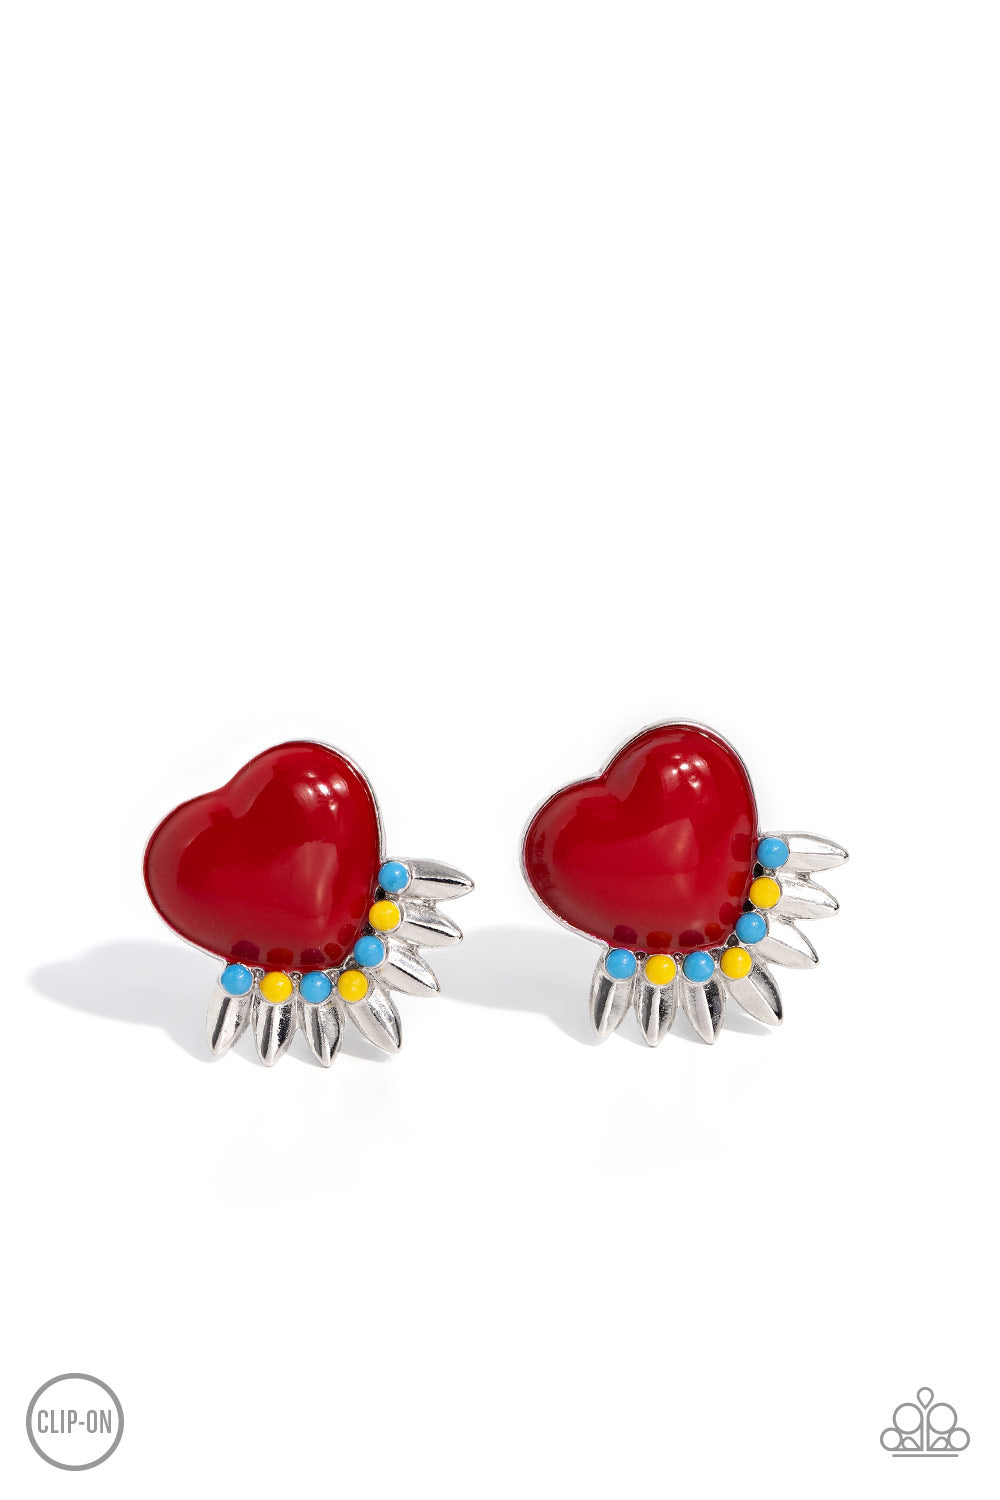 A red heart pressed in a sleek silver frame stands out at the ear. Textured silver leaves flare out from a curved cluster of turquoise and yellow beads that adorn the bottom of the heart display, creating a spring-inspired fringe. Earring attaches to a standard clip-on fitting.   Featured inside The Preview at Made for More! Sold as one pair of clip-on earrings.  Clip On Earring New Kit